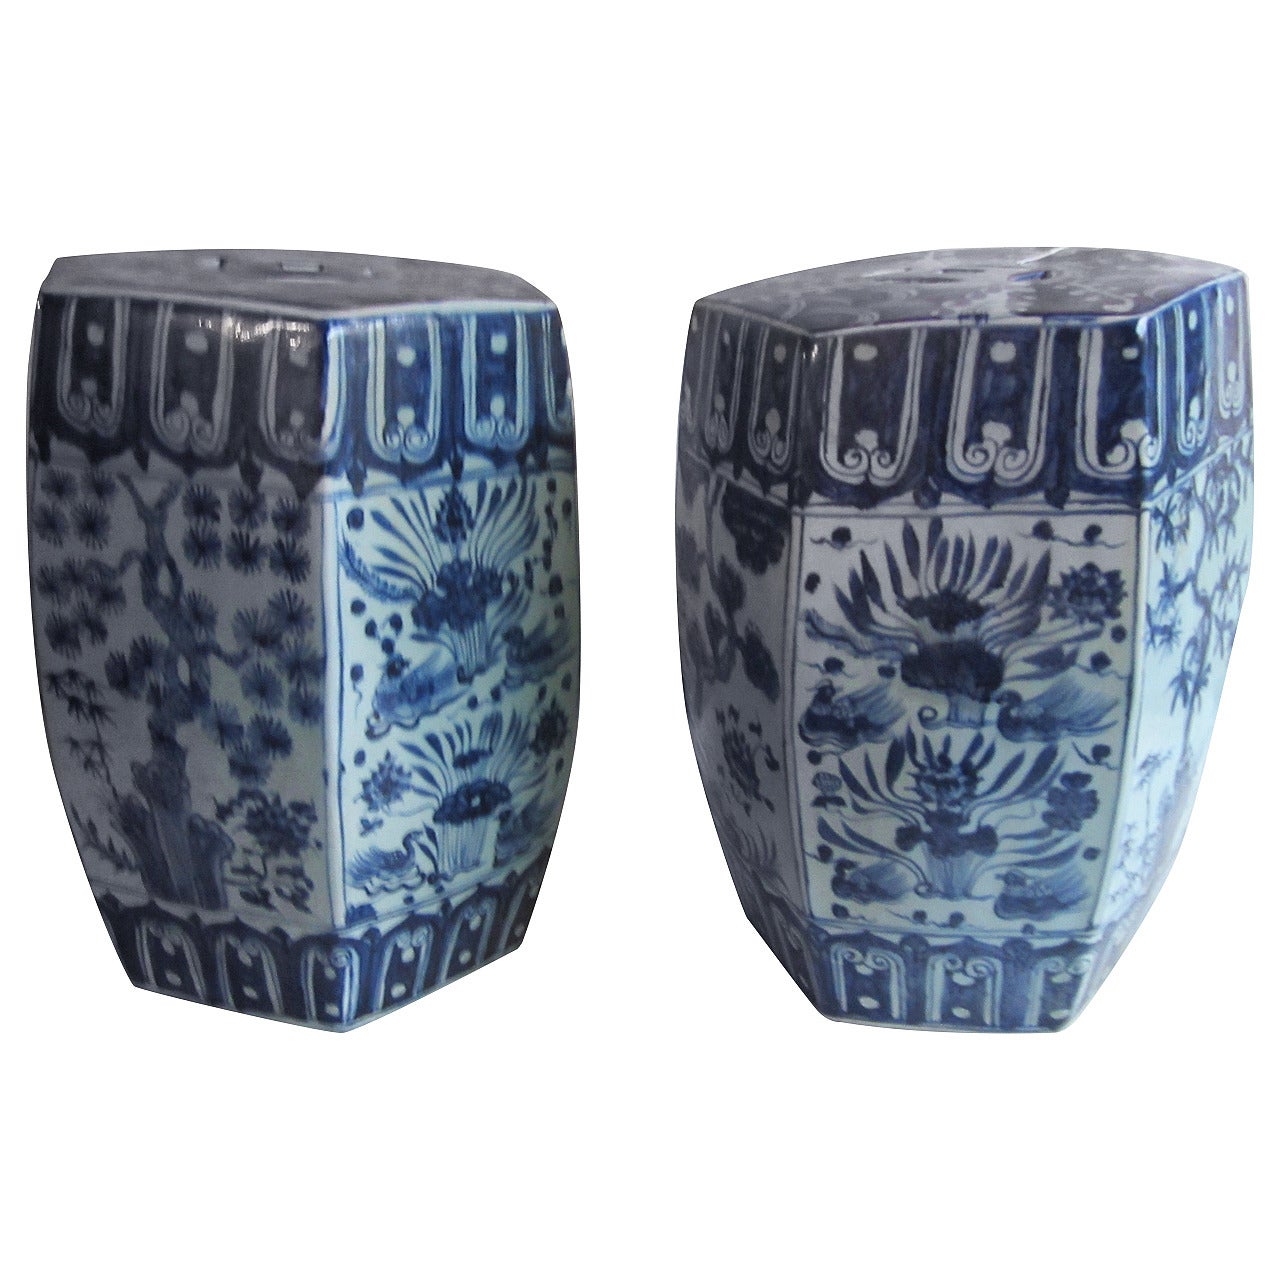 Hexagonal Chinese Blue and White Garden Seats or Stools